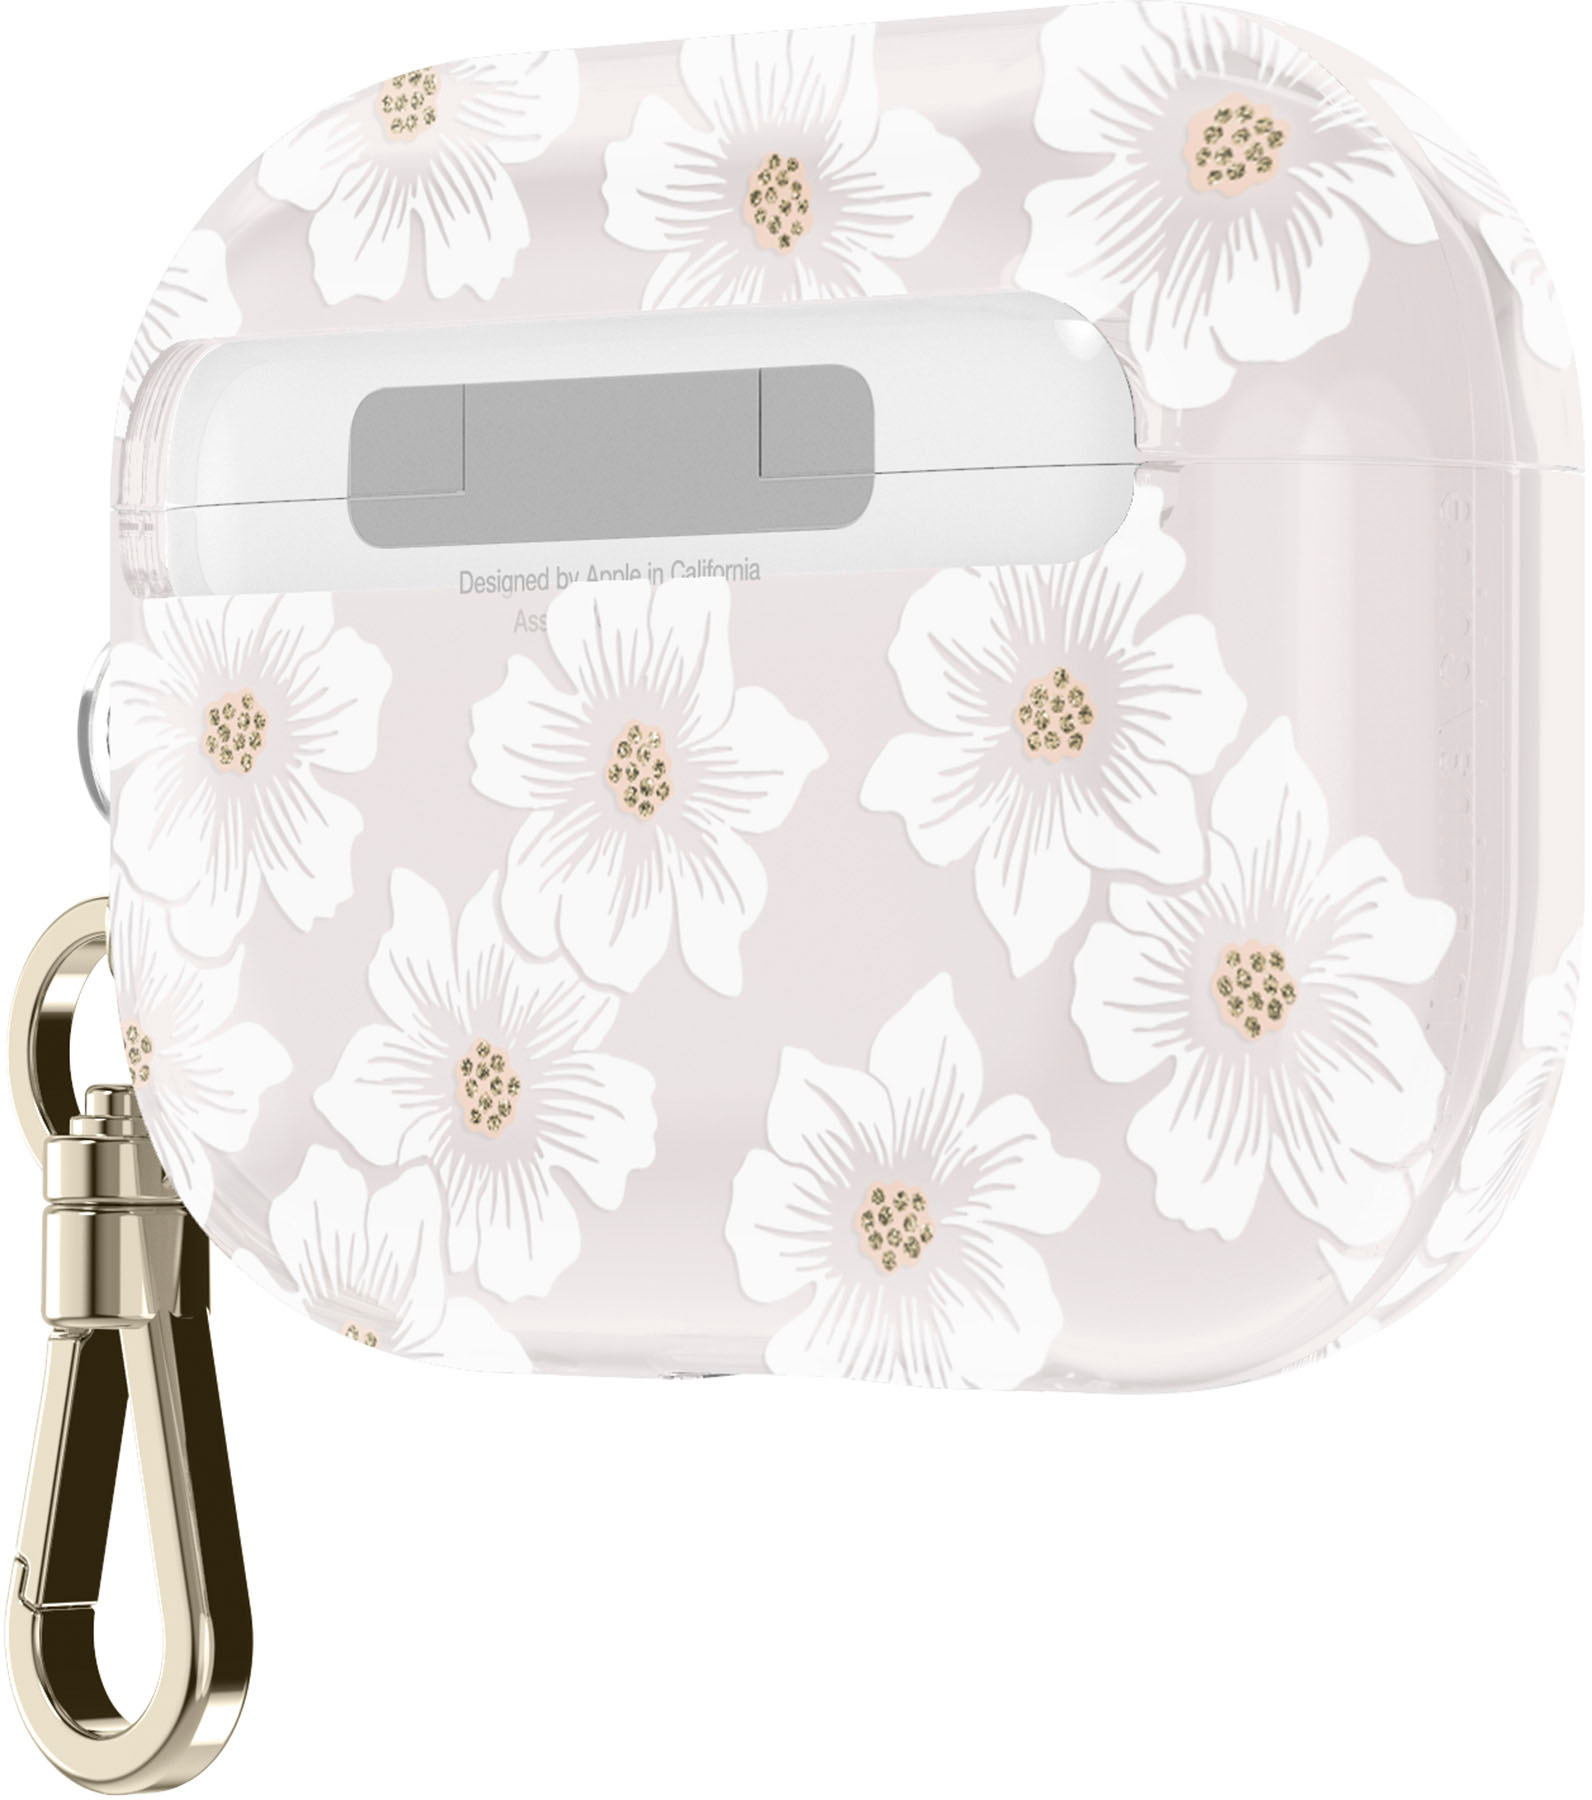 Best Buy: kate spade new york Kate Spade AirPods Pro Case Ombre